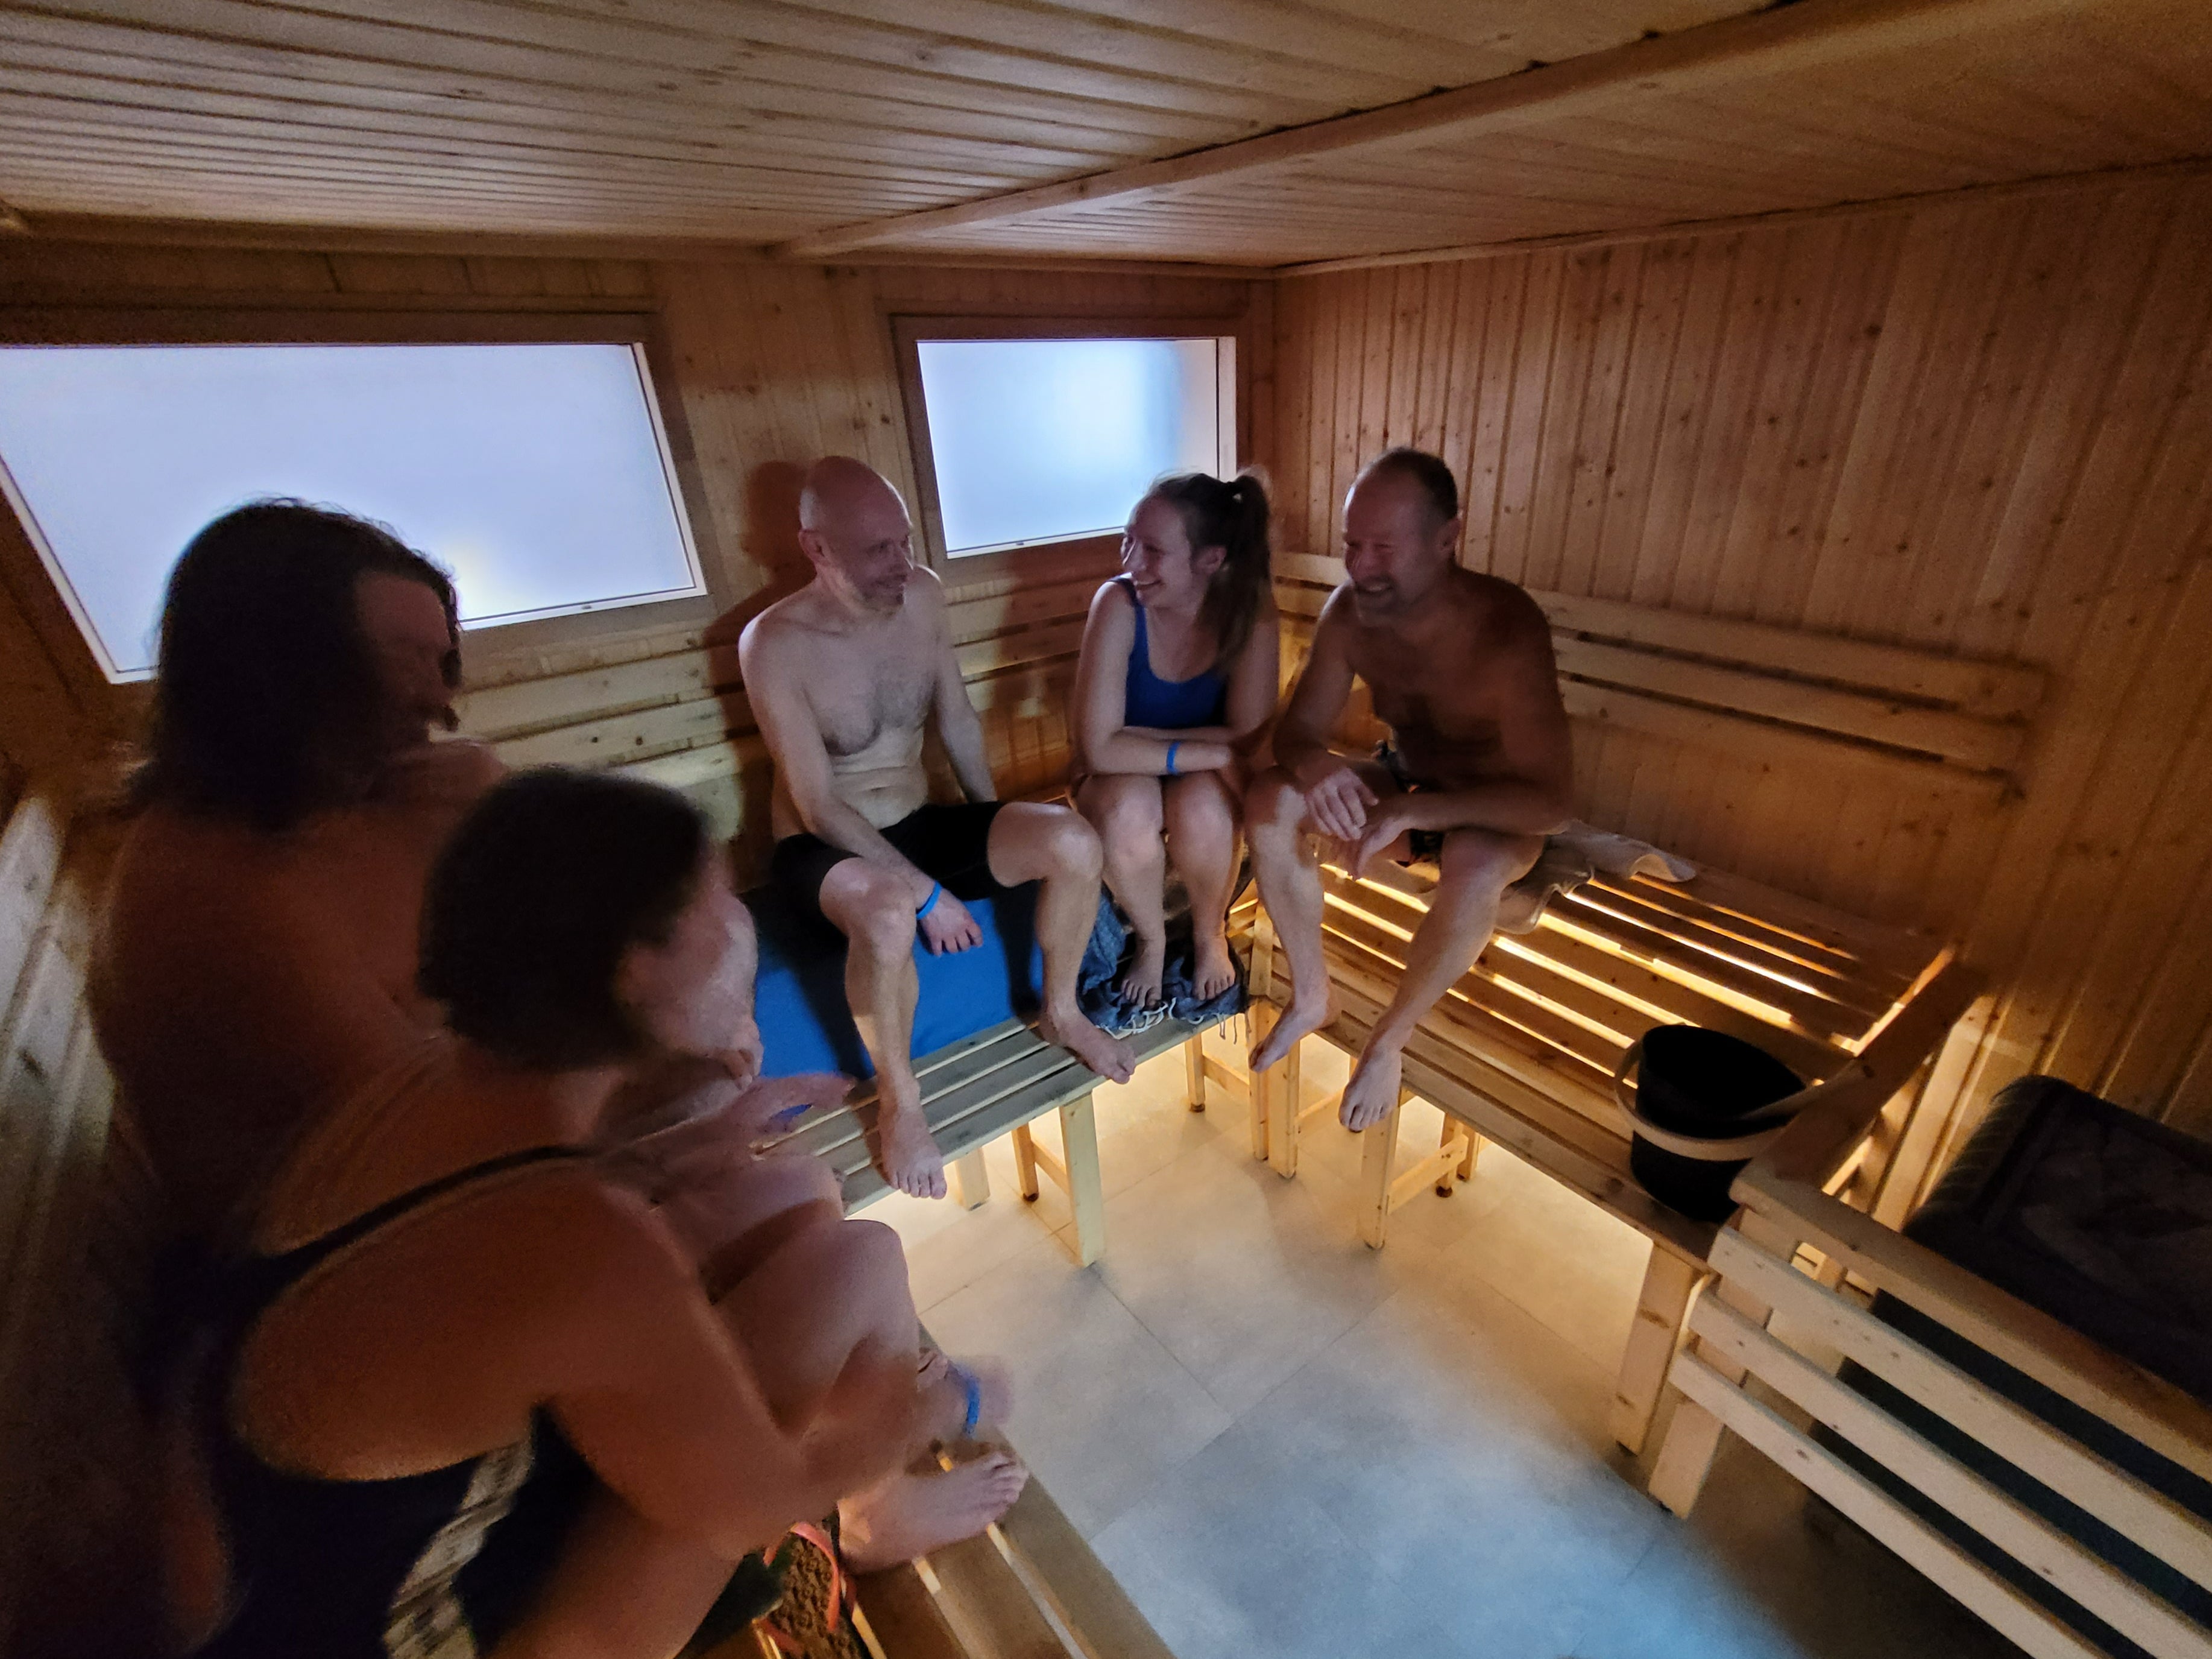 Community spirit: Folkestone Sea Sauna has created a space for people to connect